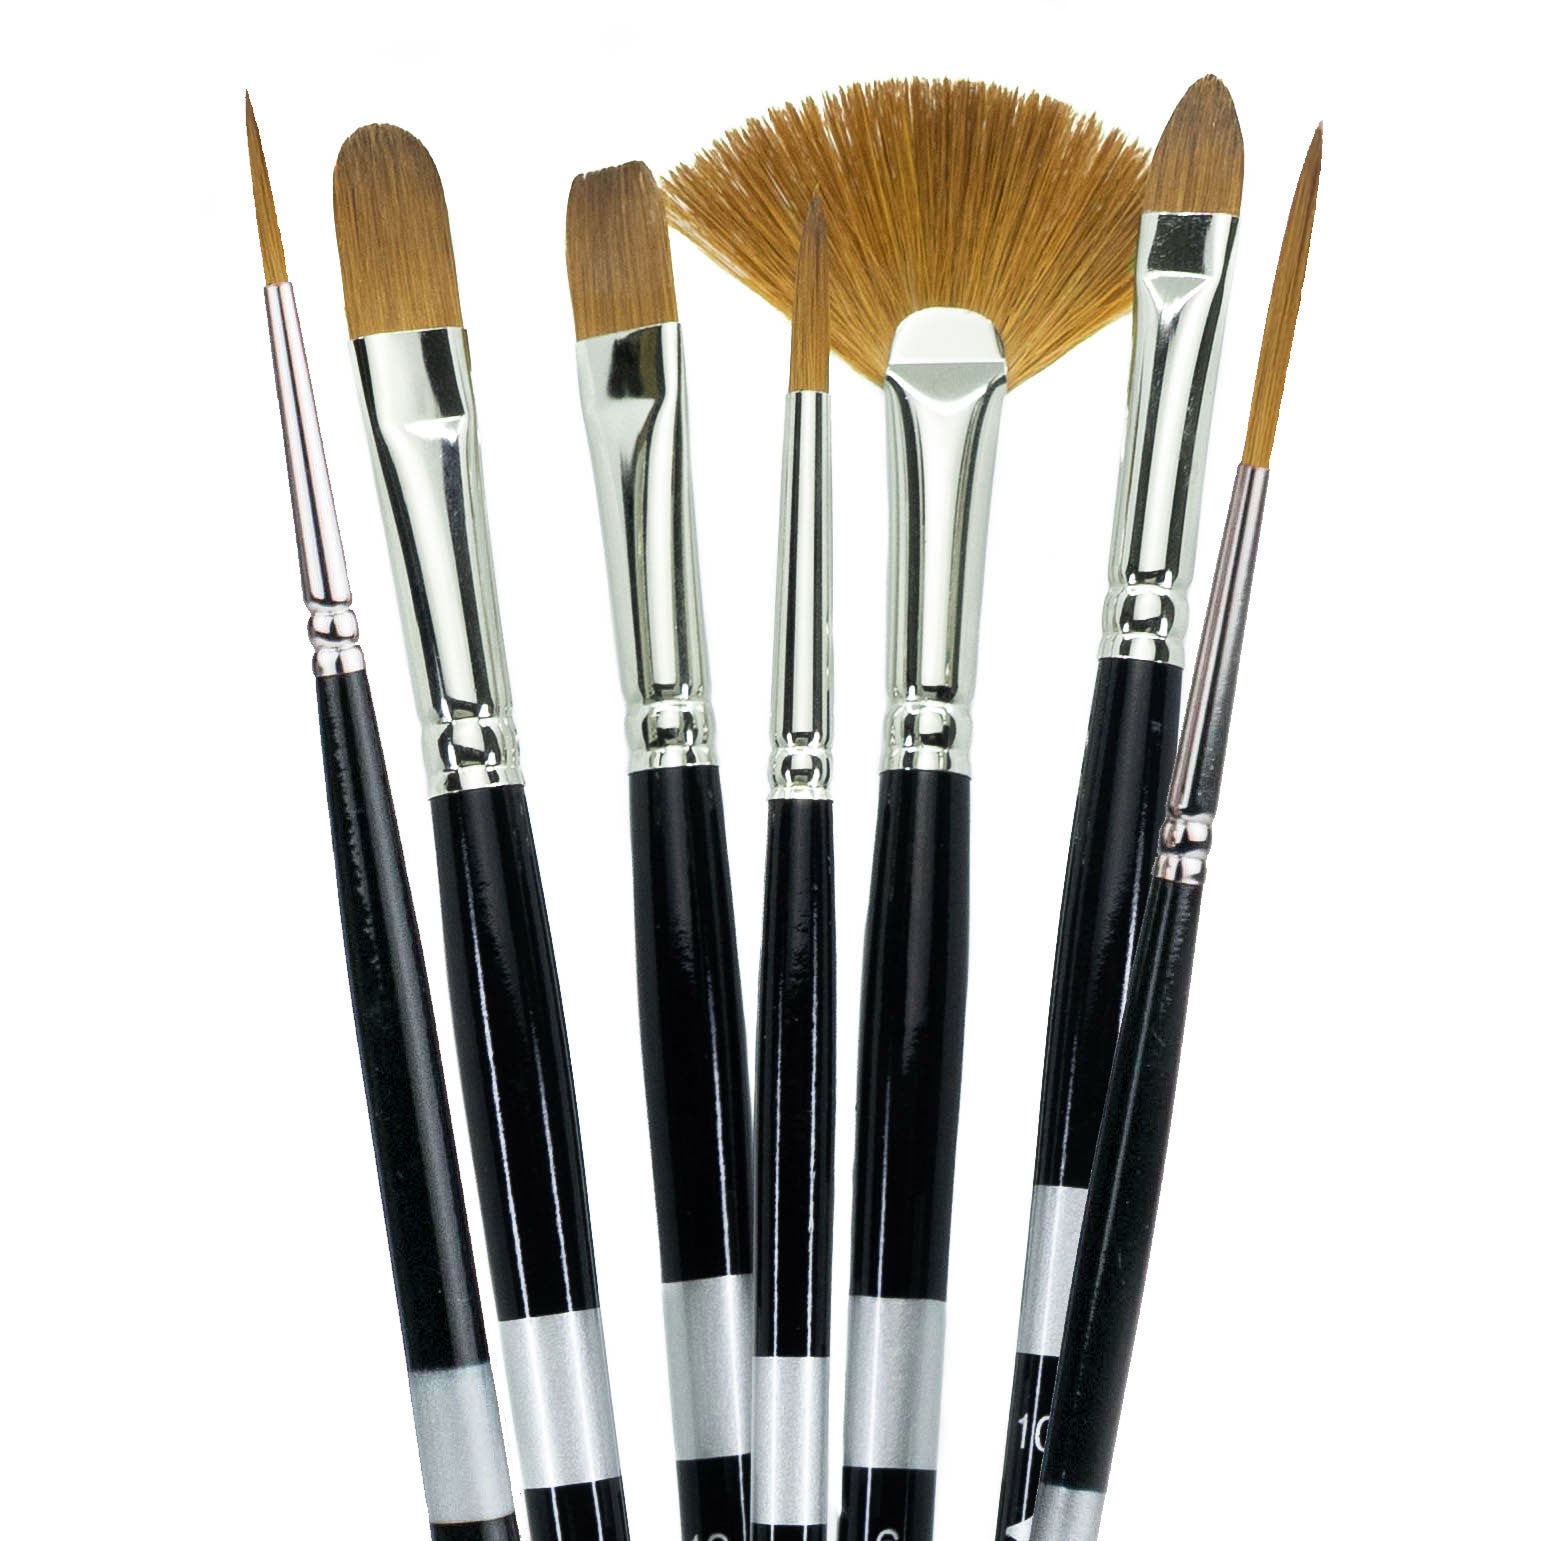 Trekell Golden Taklon Brushes for Acrylic and Watercolor Painting